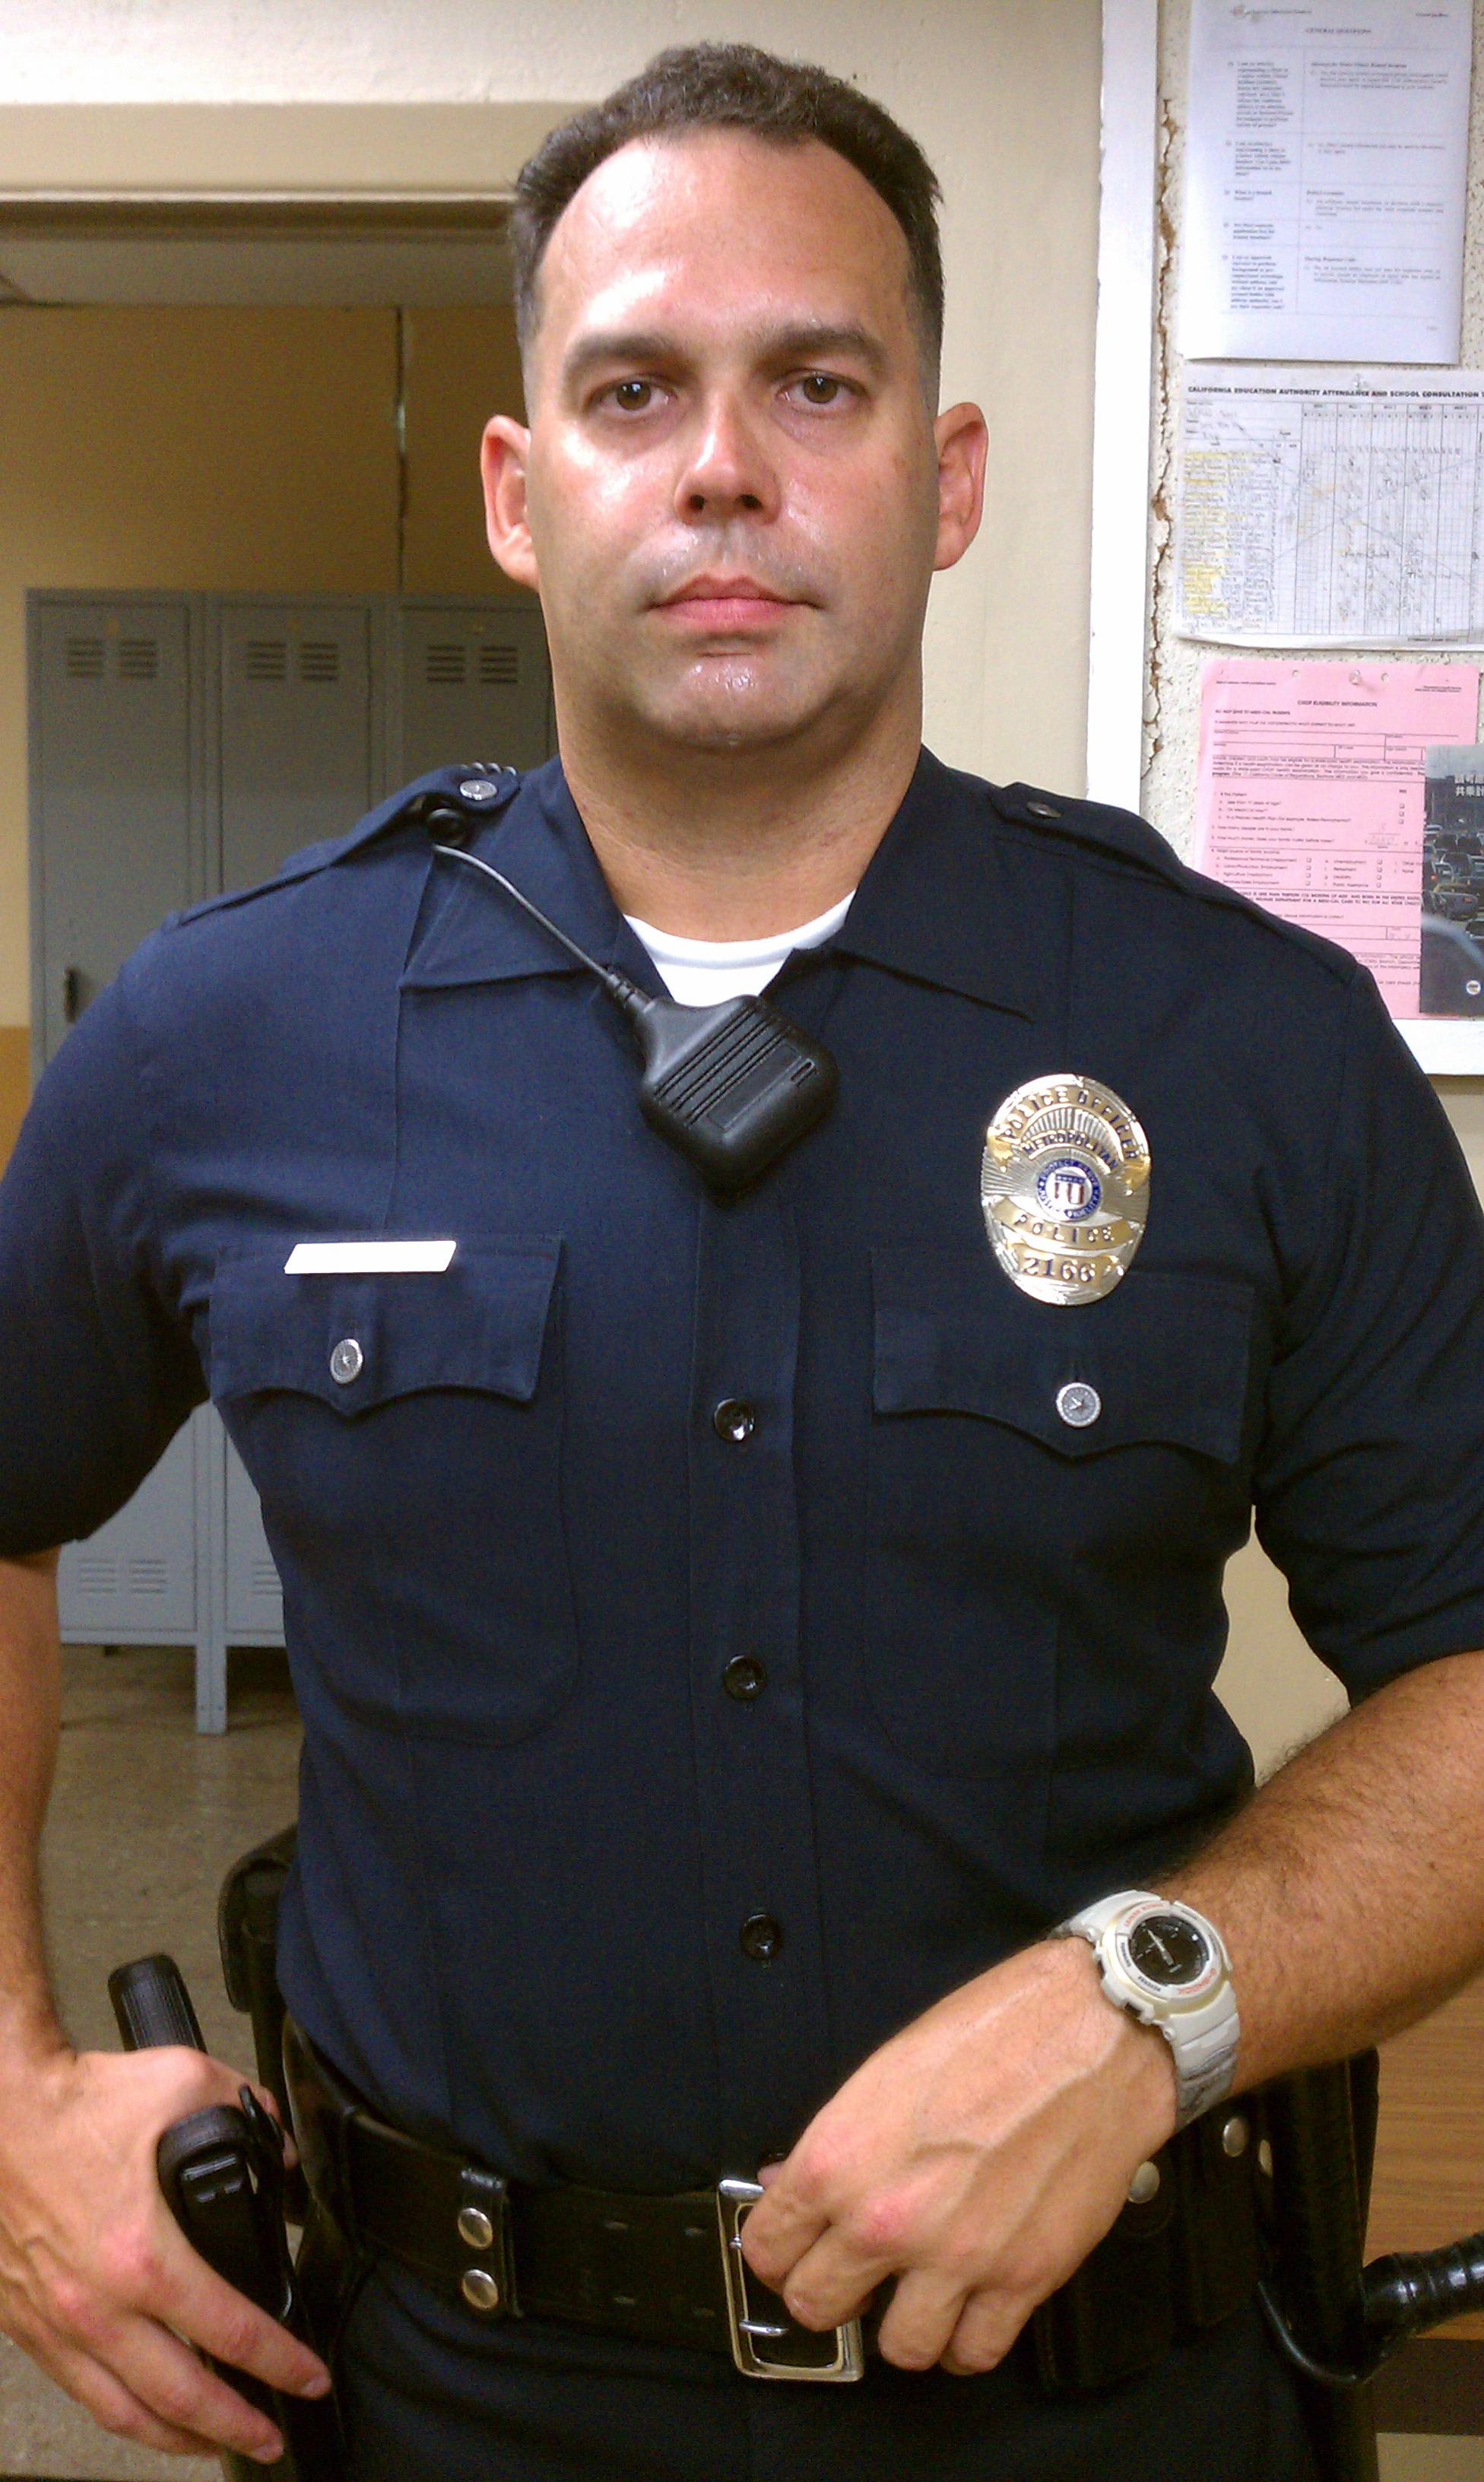 On set at a fake LAPD office shooting a prank video short